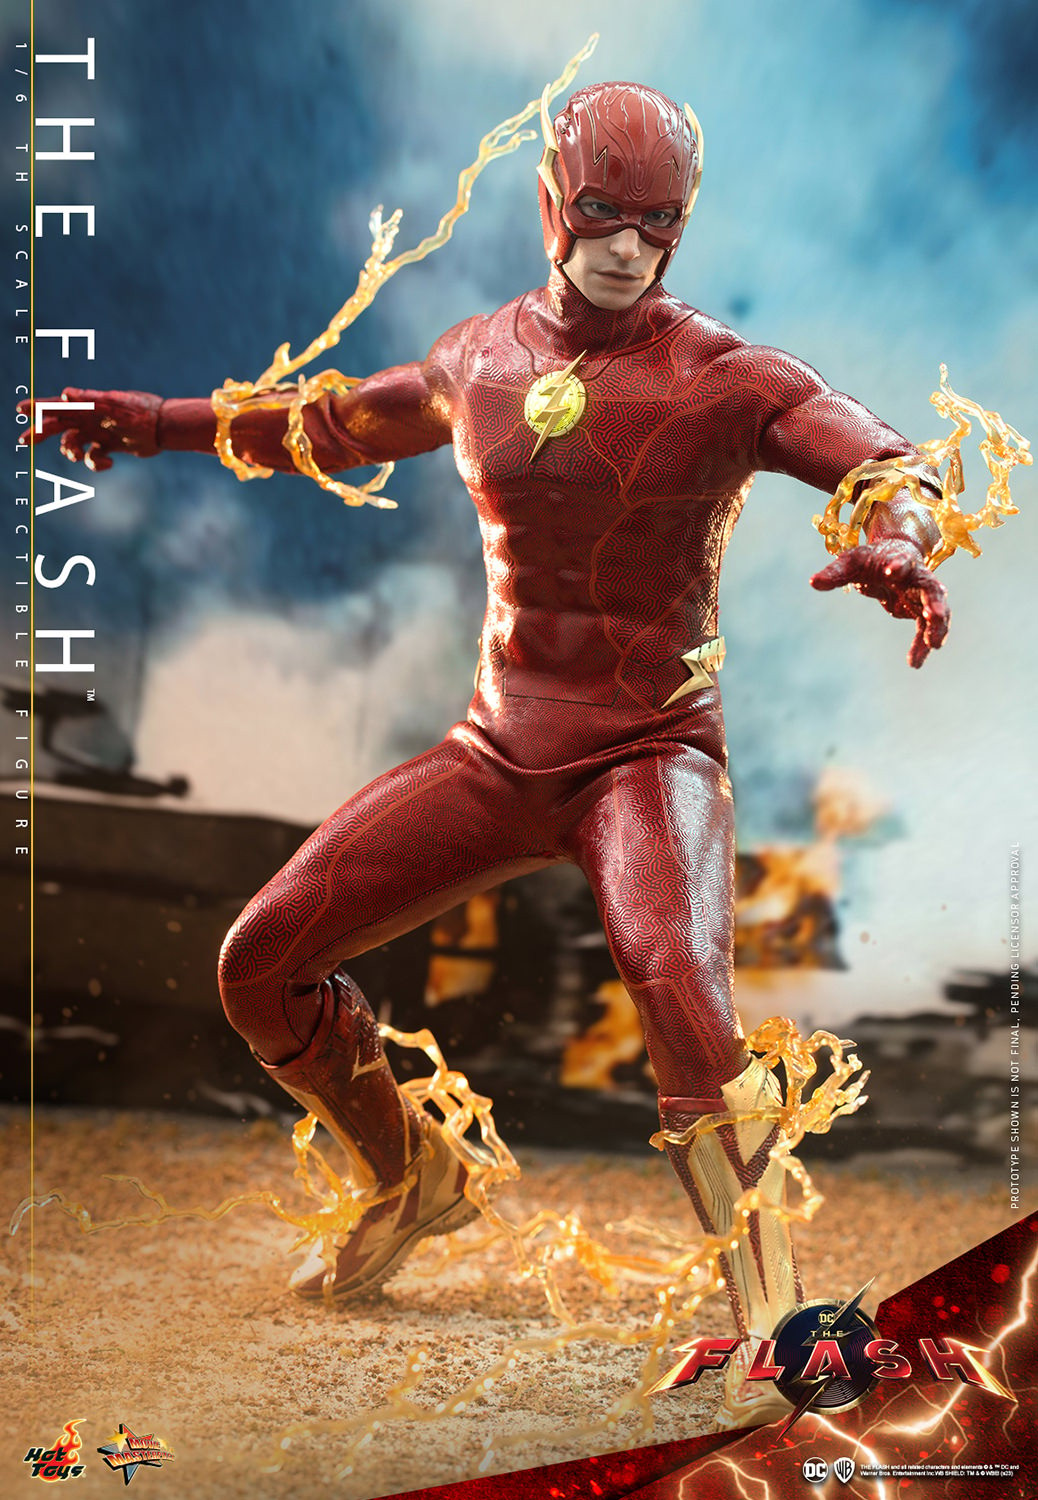 The Flash Sixth Figure Toys | Sideshow Collectibles